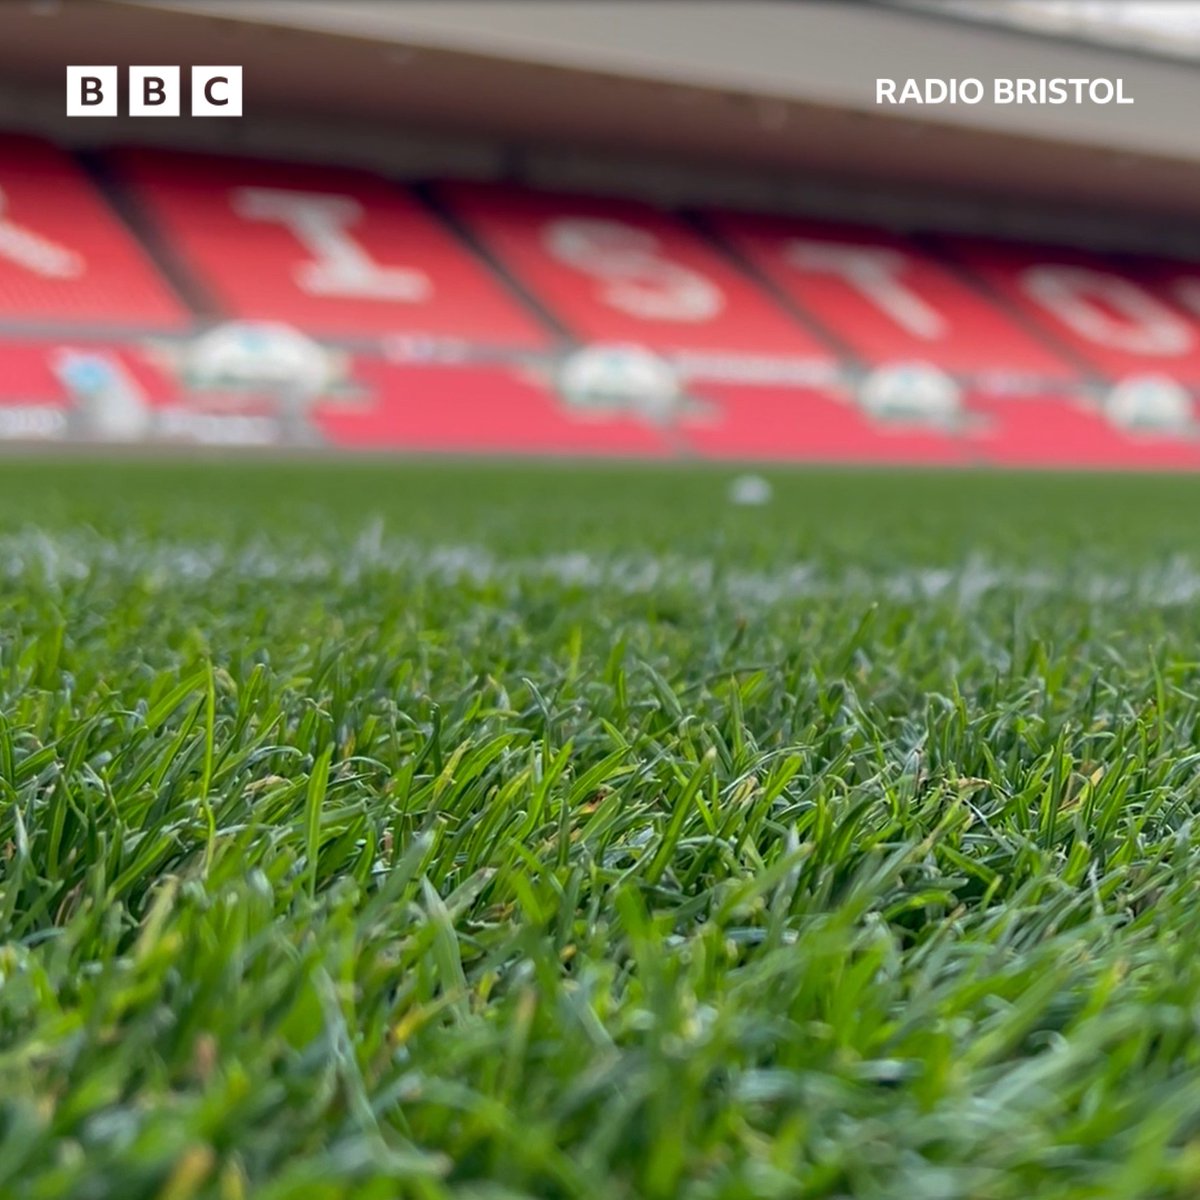 It is a return to Ashton Gate today for @bristolcitywfc as they host @SpursWomen in the #WSL (2pm k/o). City are 6 points from safety and need wins quickly. Full match commentary on @bbcbristolsport alongside Frankie Brown. 📻@BBCRB 94.9FM & DAB 💻📱@BBCSounds 📺 Freeview 719